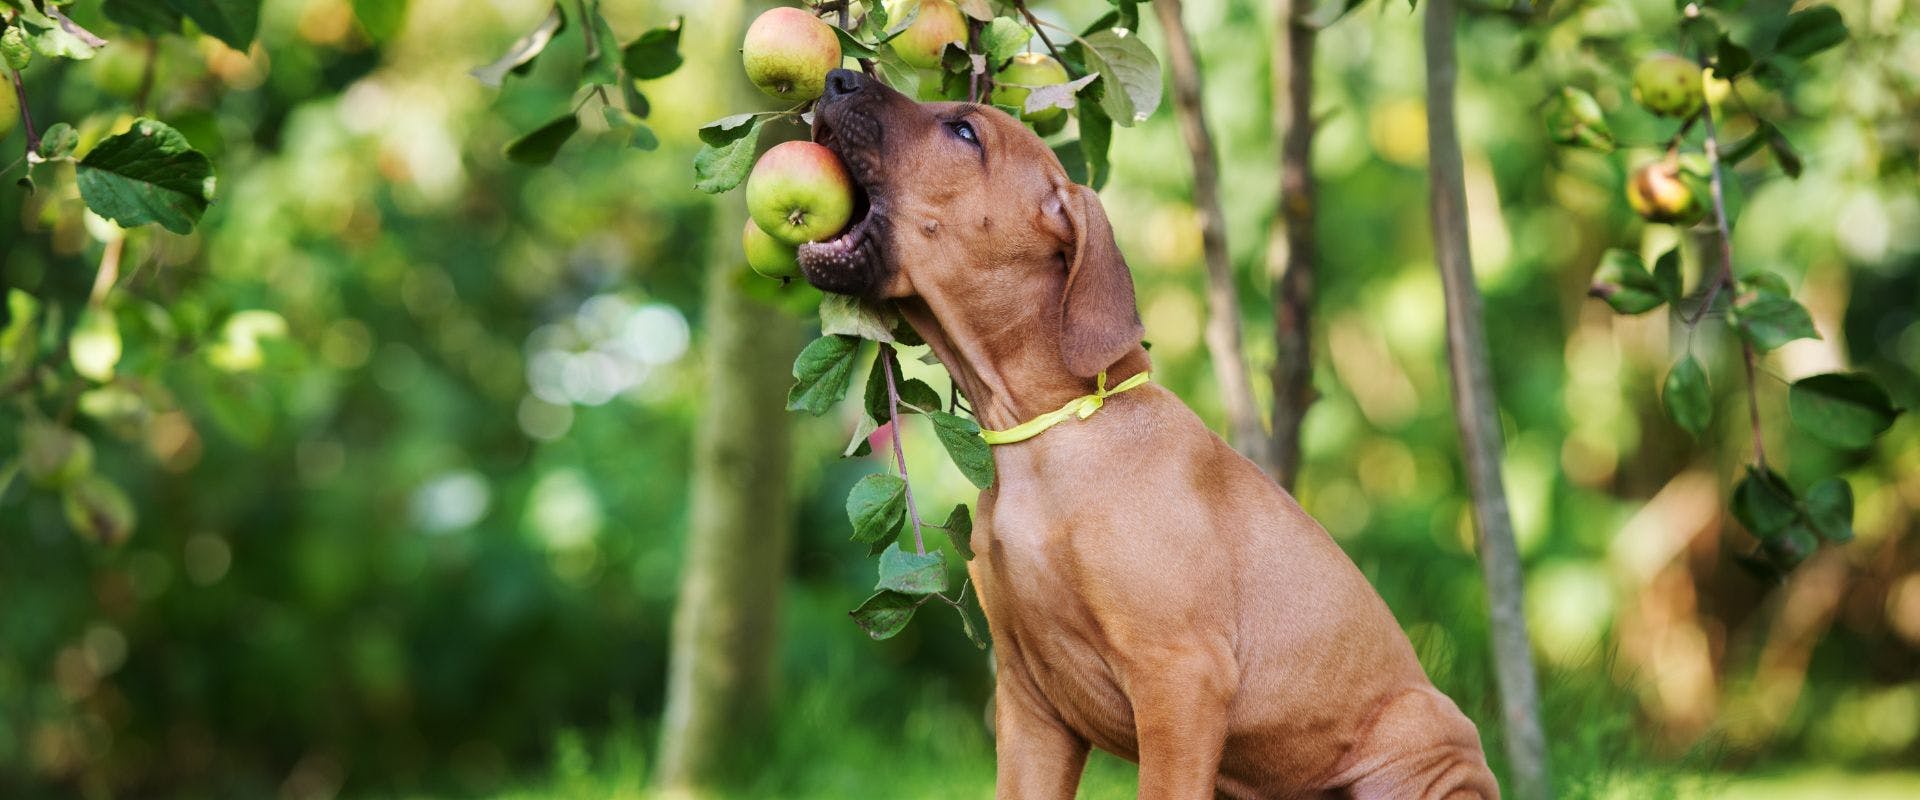 brown dog eating apple from tree